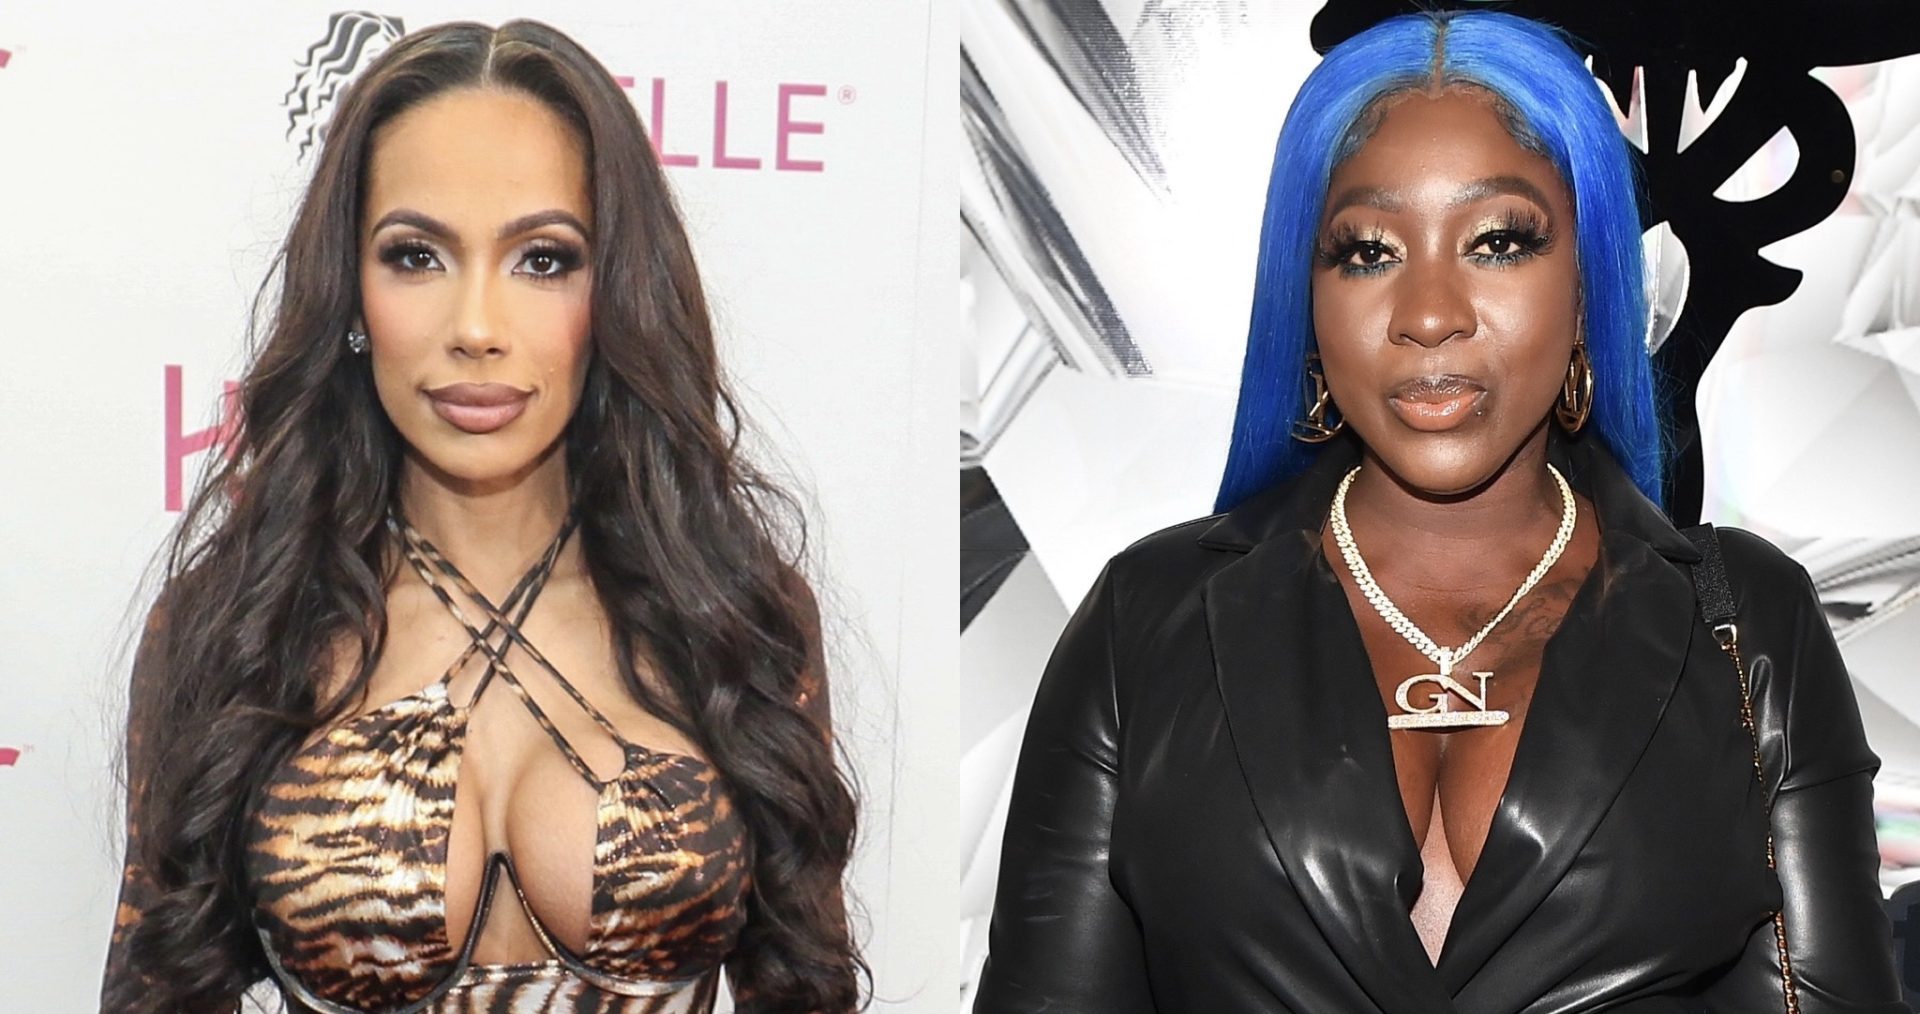 Erica Mena Reportedly Apologizes For ‘Monkey’ Comment Made Toward Spice: ‘My Use Of That Word Was Not… Racially Driven’